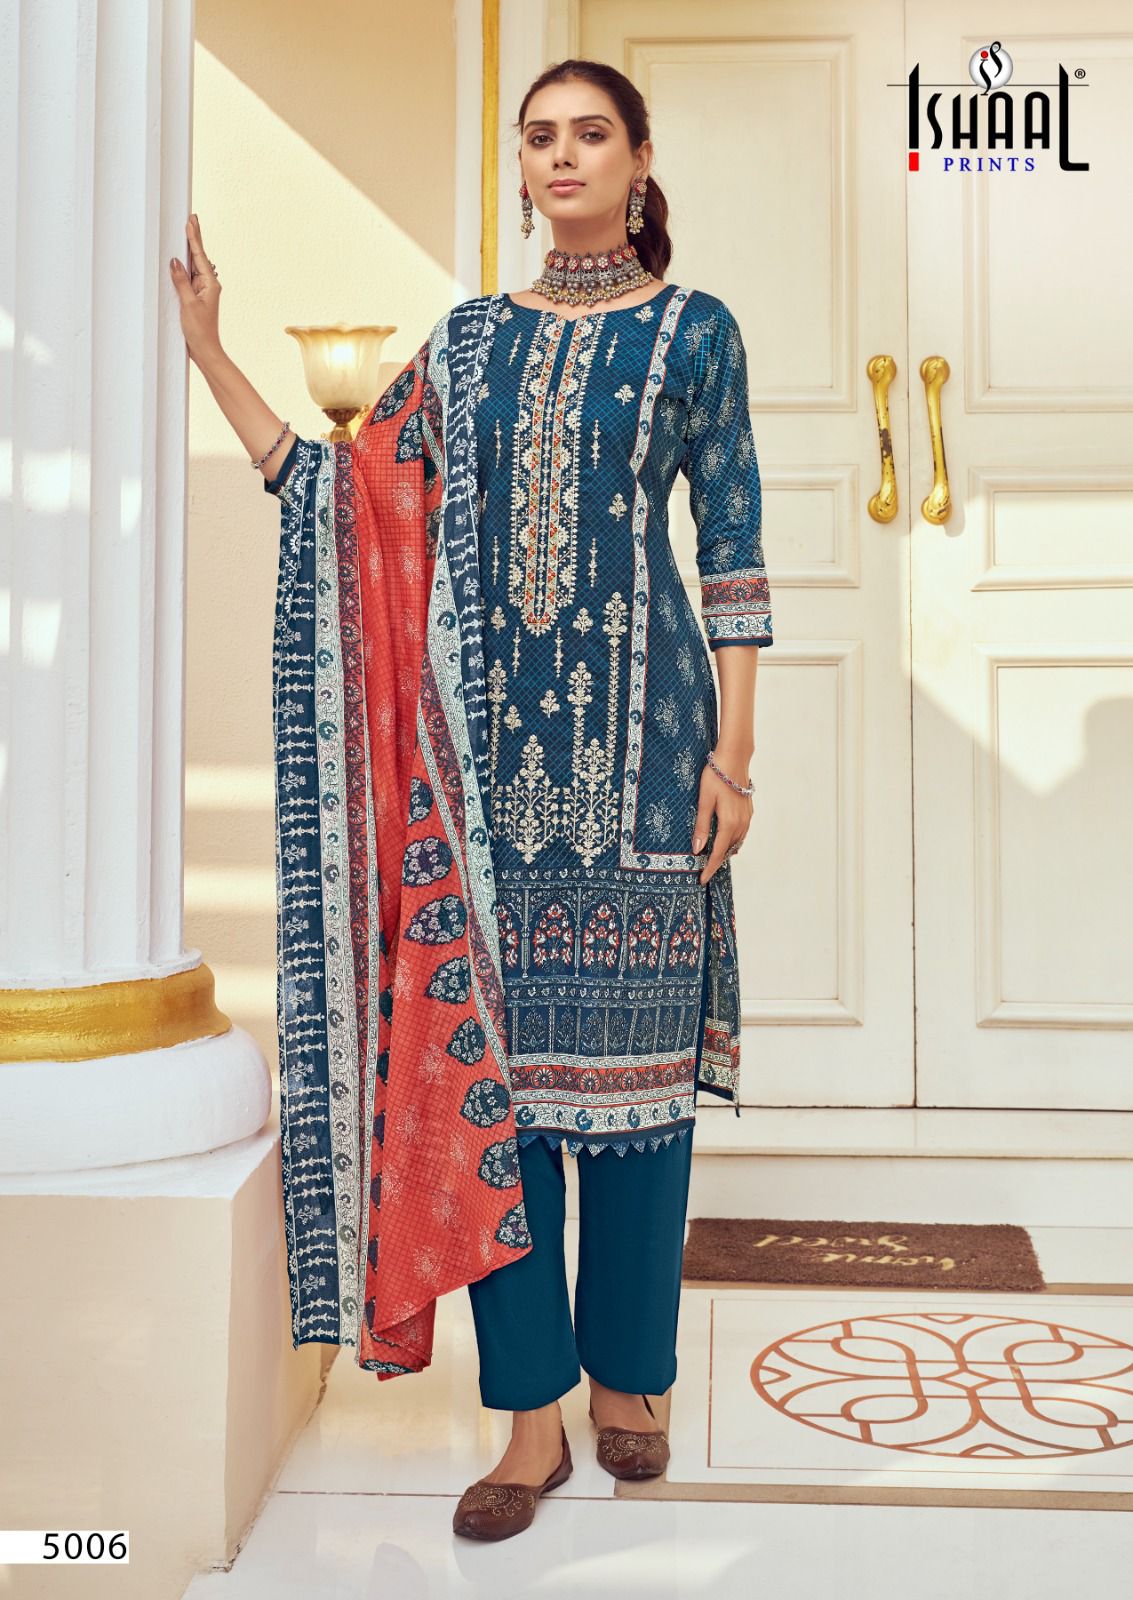 Ishaal Print Embroidered Vol  5 collection 3